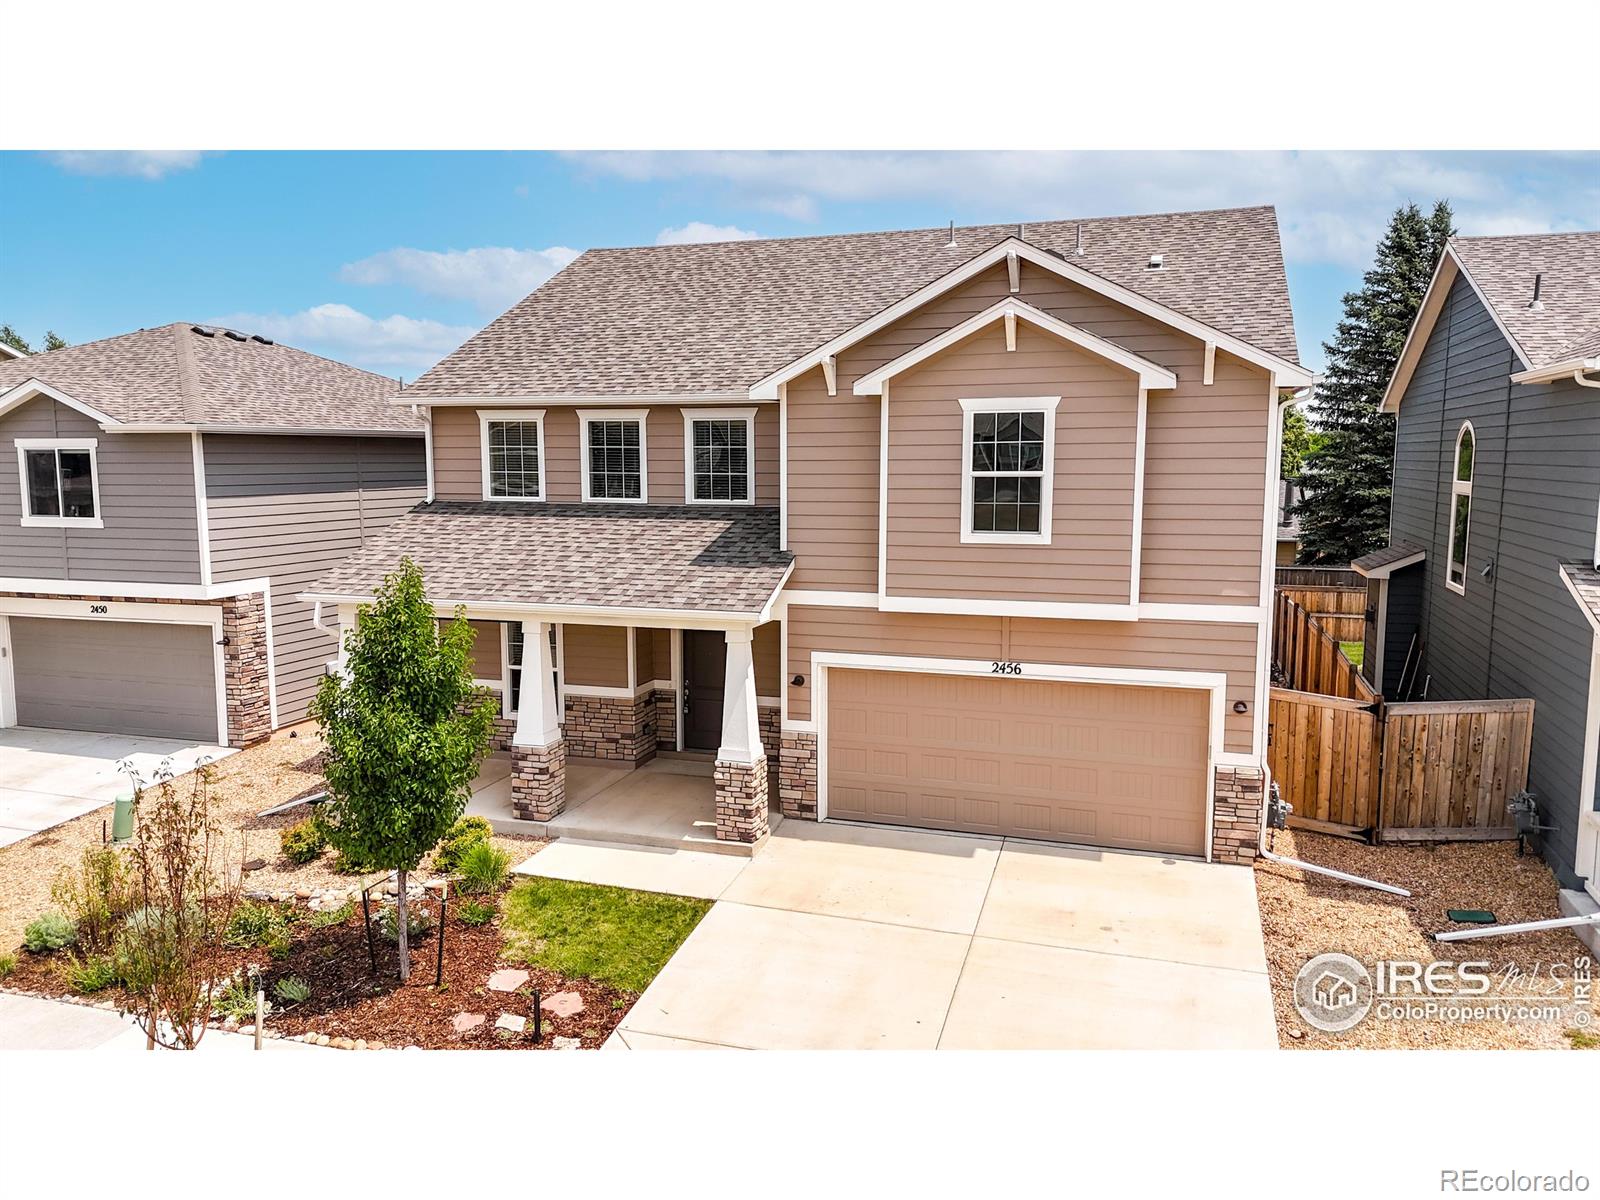 2456  Crown View Drive, fort collins MLS: 4567891015140 Beds: 3 Baths: 3 Price: $720,000